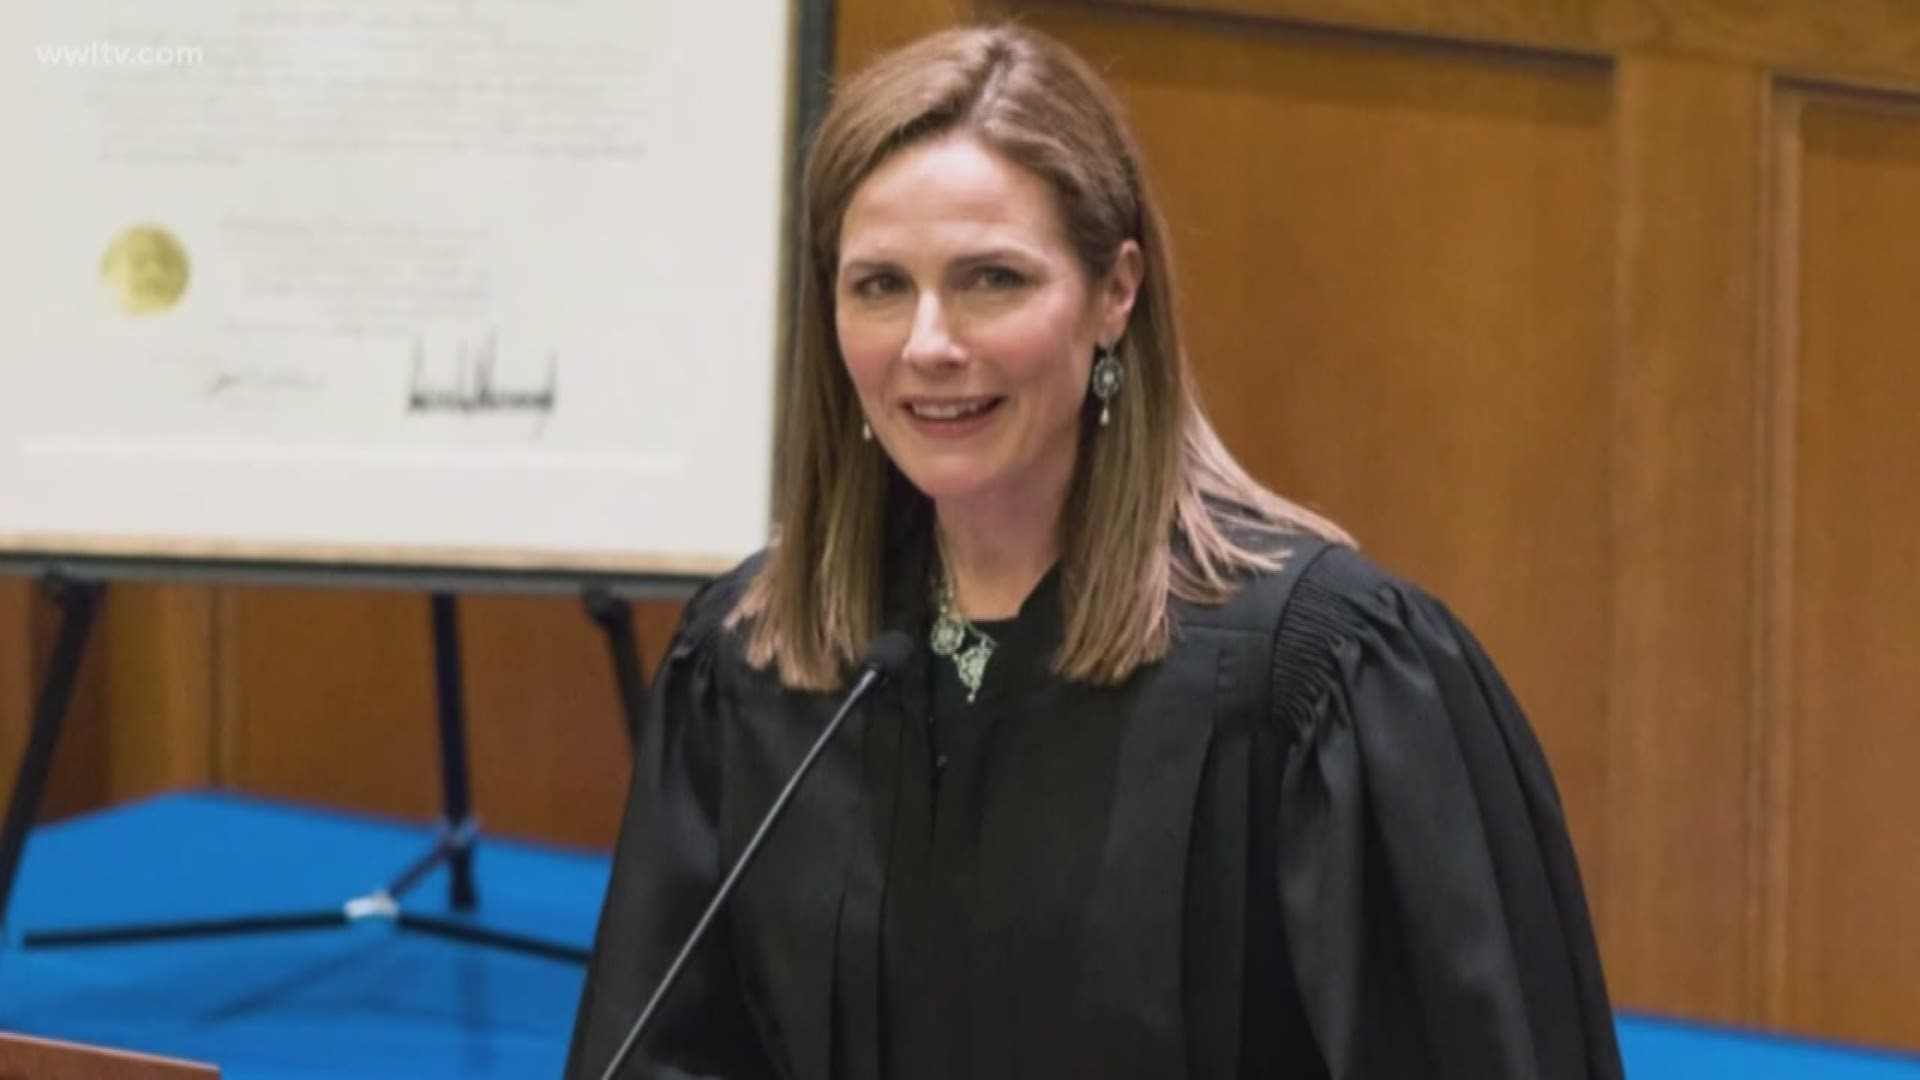 New Orleans native Amy Coney Barrett appears to be the only woman President Donald Trump is considering.